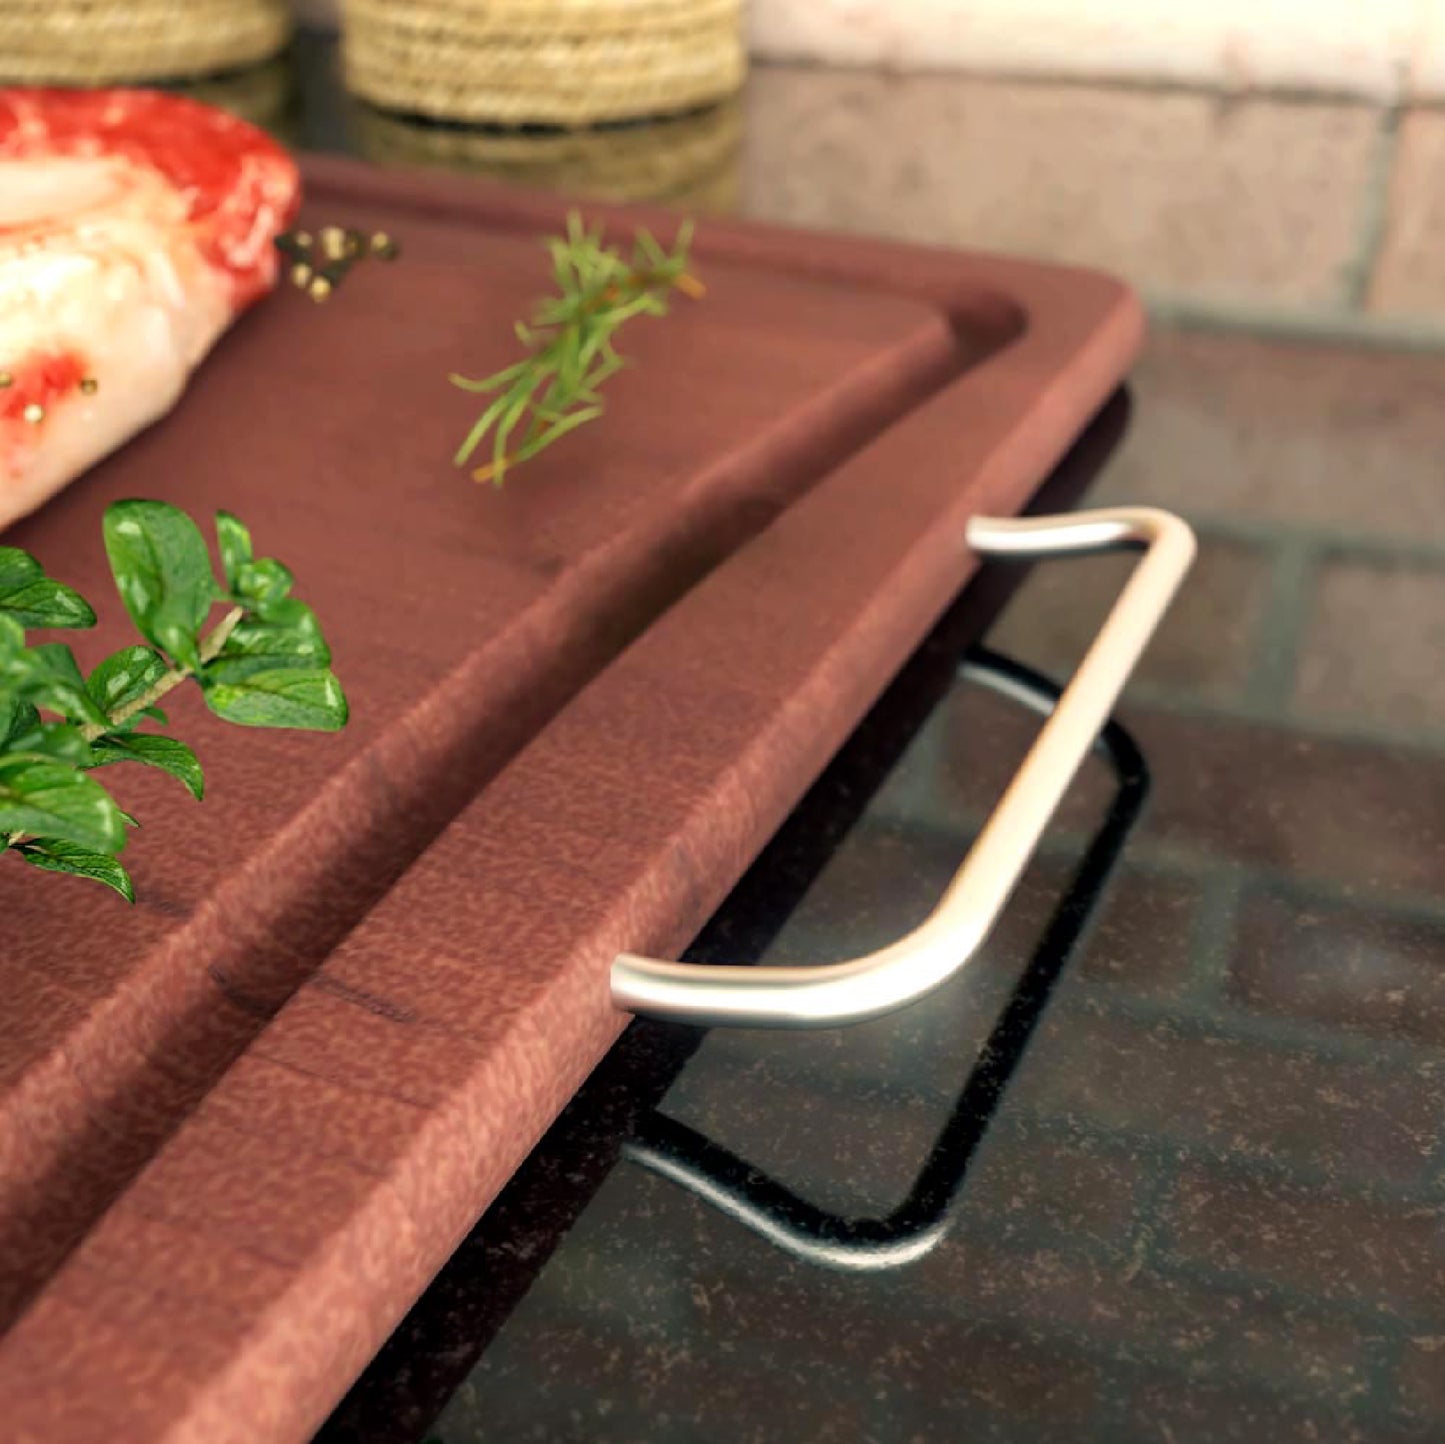 Meistar Premium Wooden Cutting Board with Stylish Metallic Handles - Includes BBQ Stainless Steel Knife and Fork Set